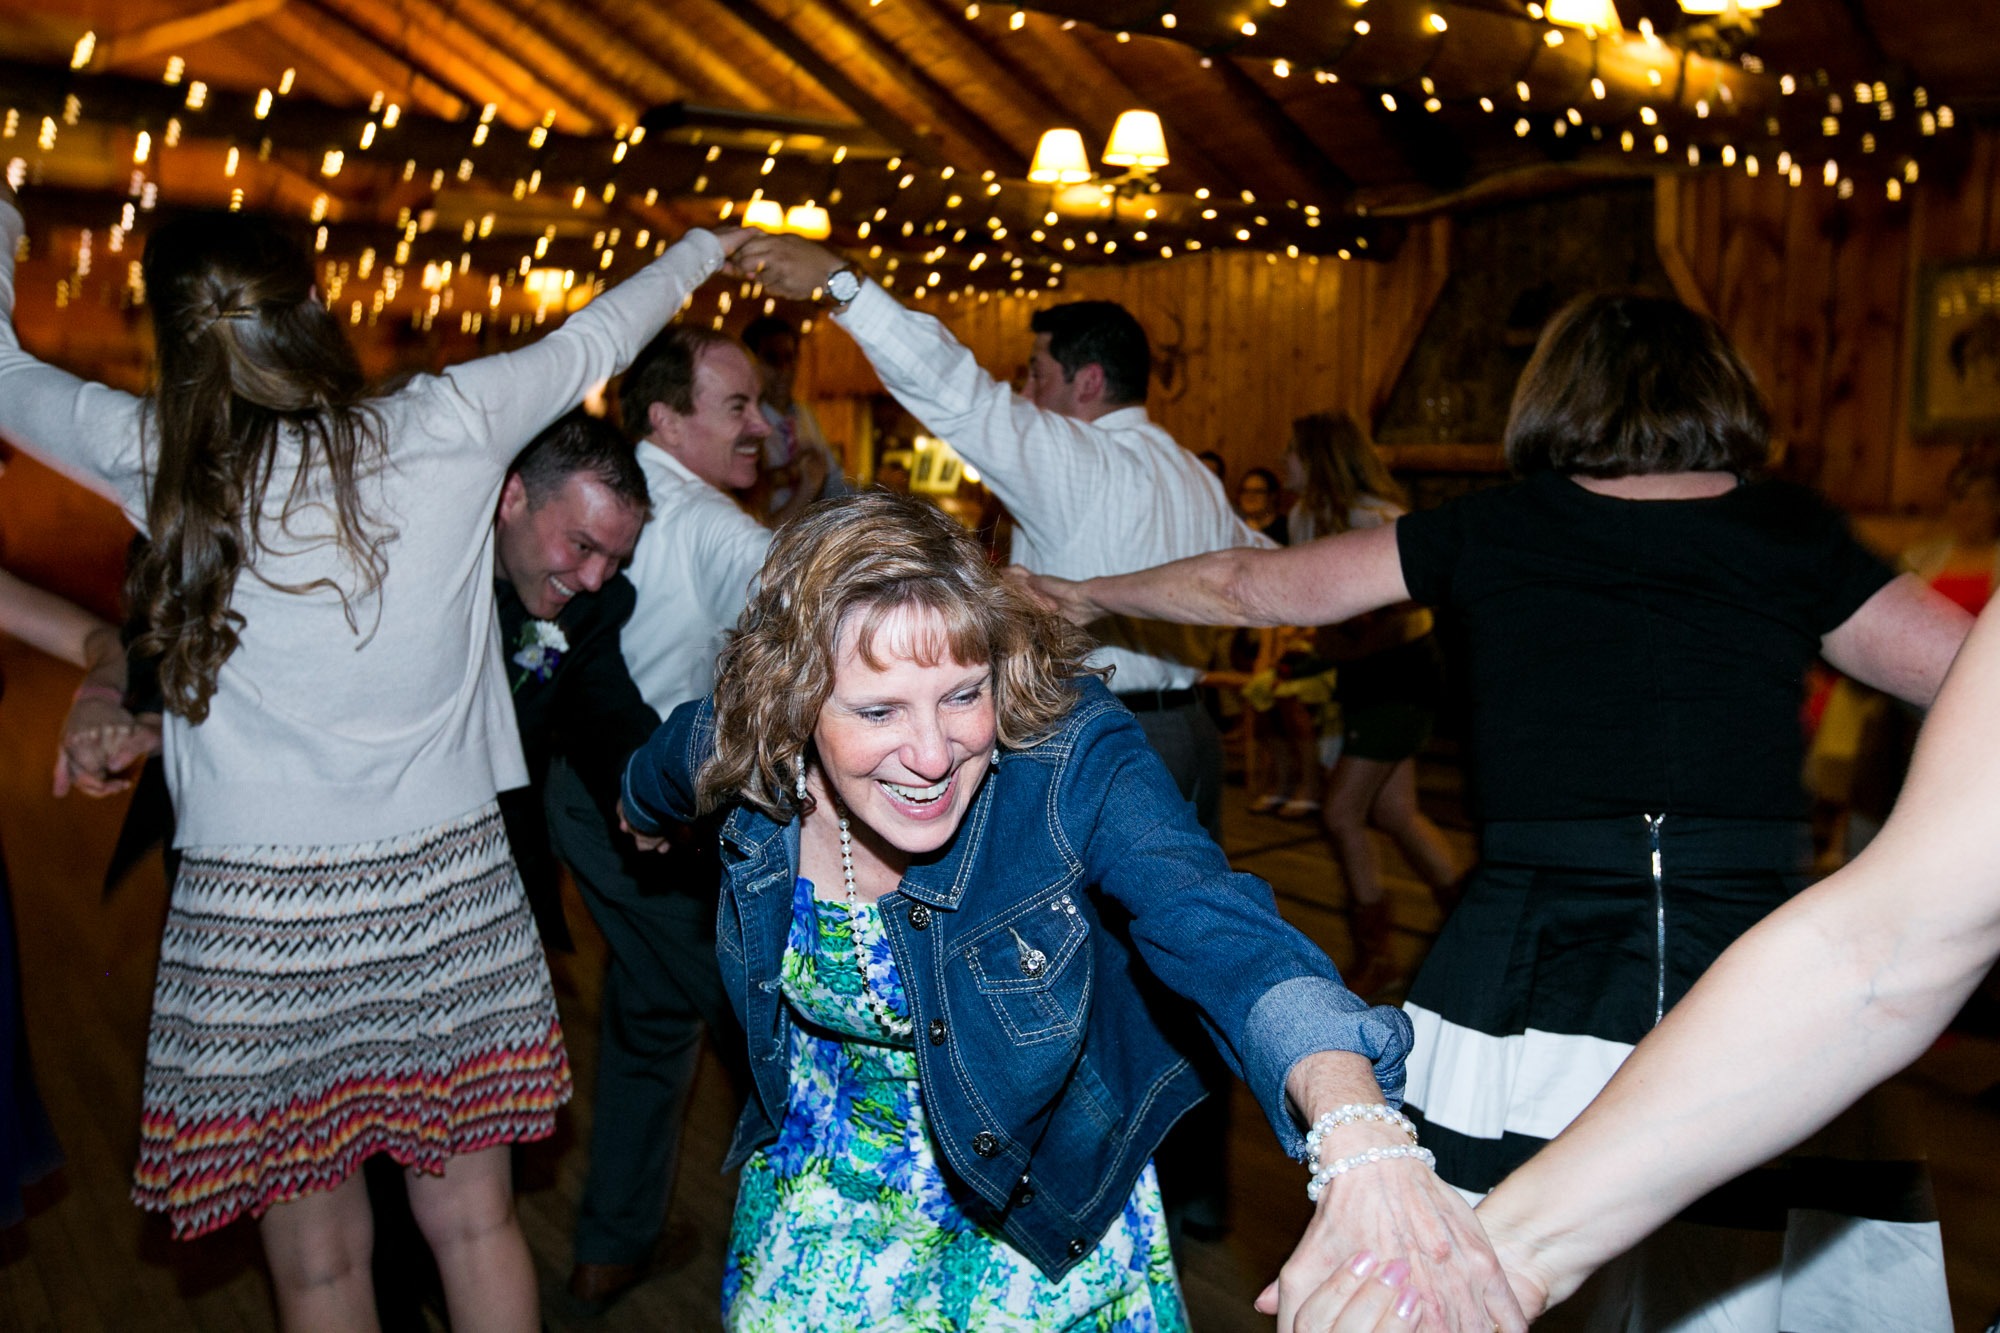 wedding guest hold hands and smile as they weave under hand tunnels while dancing